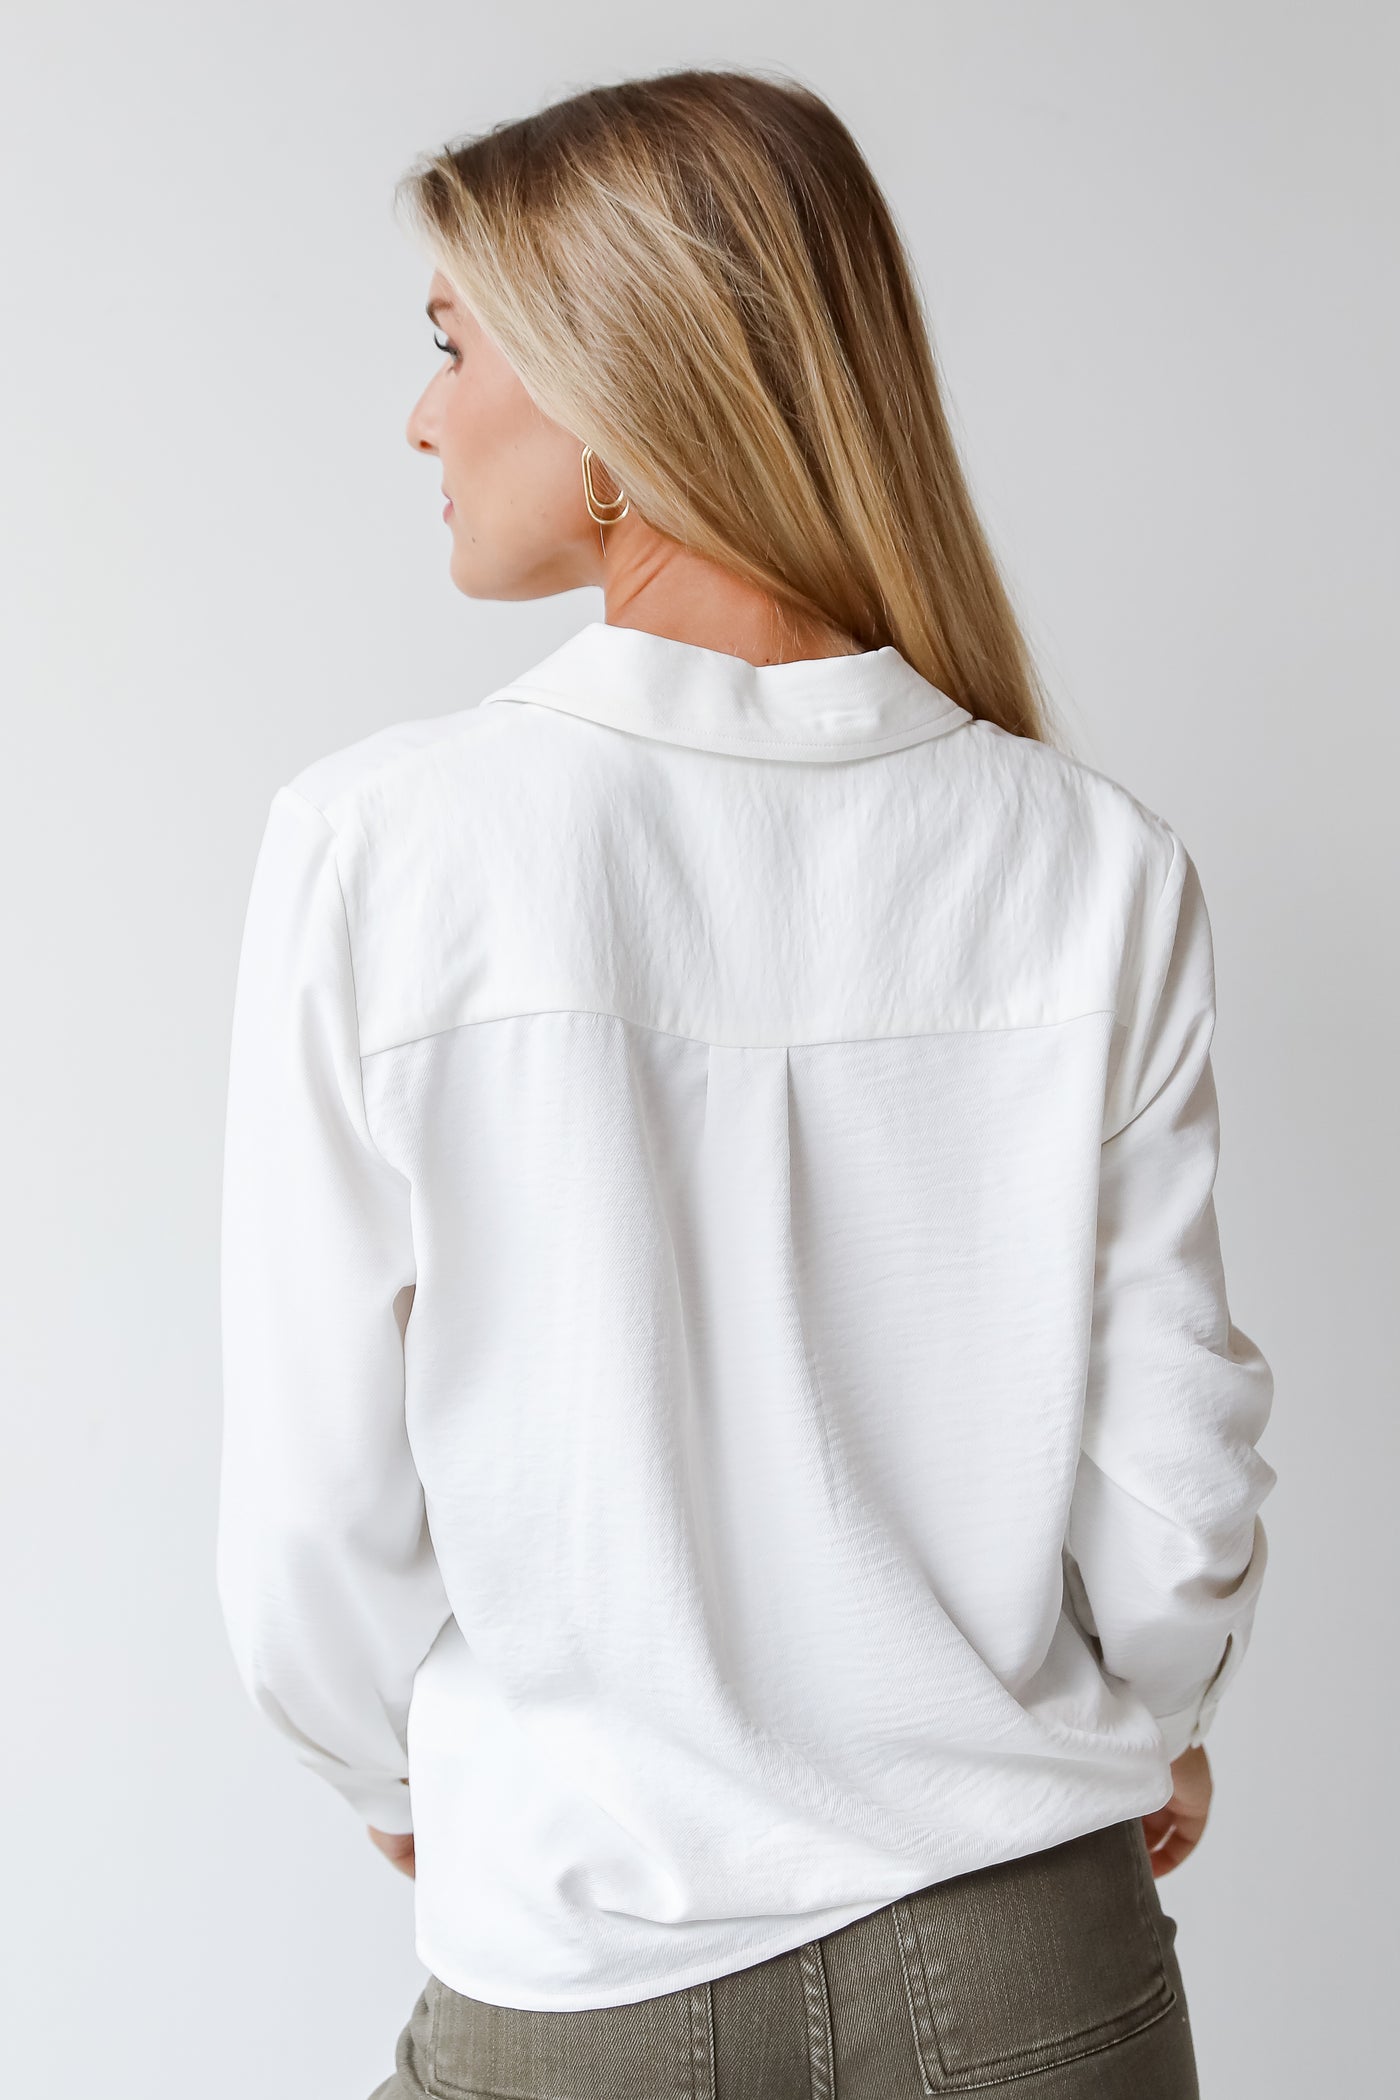 white collared blouse back view